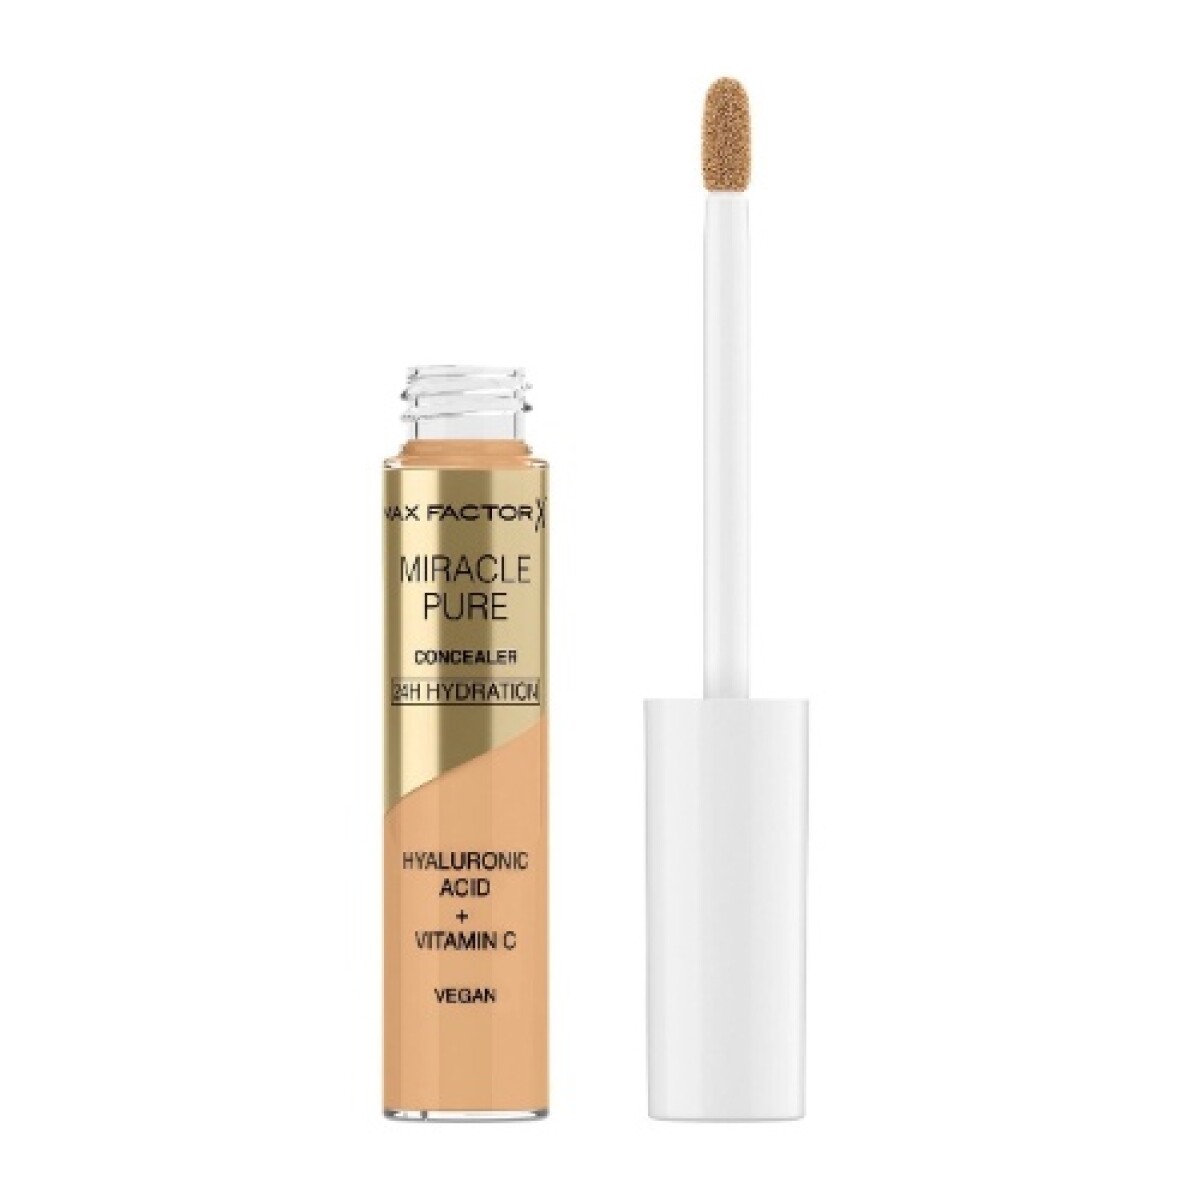 Mf Miracle Pure Concealer 030 